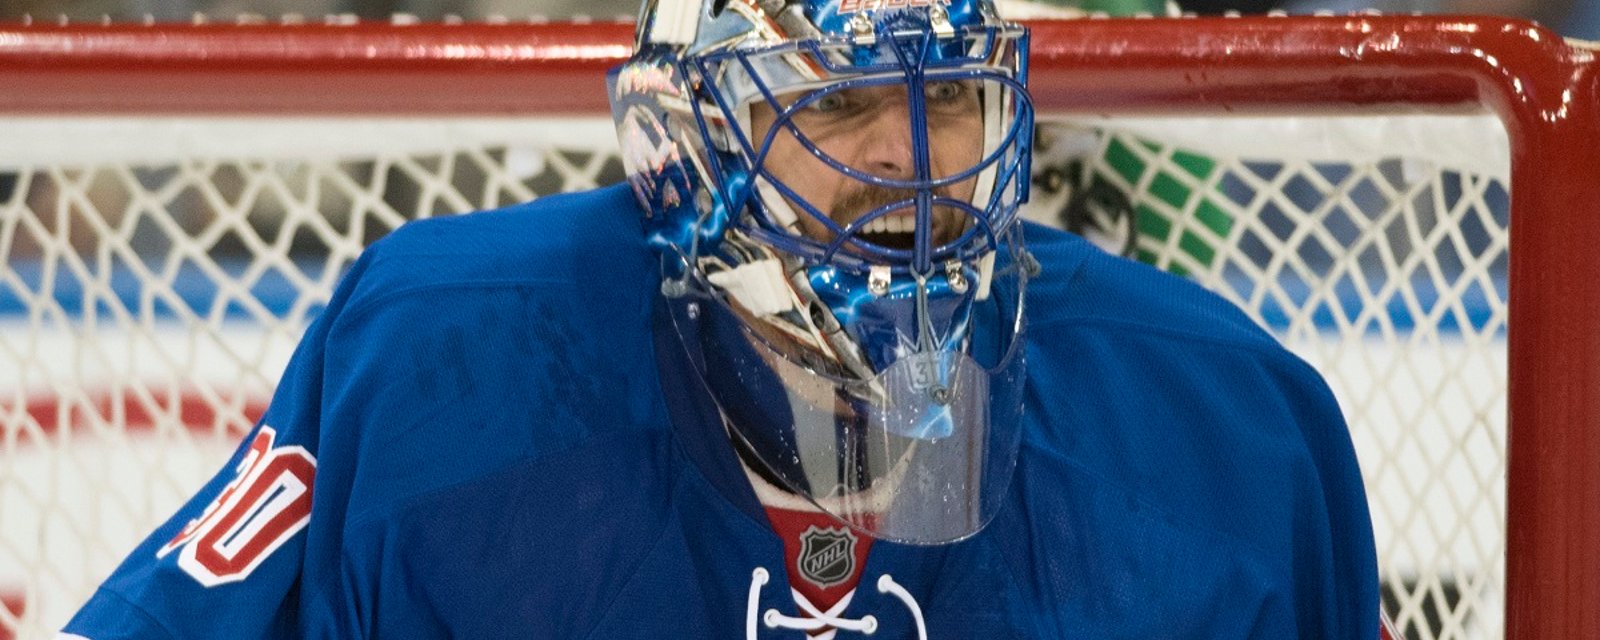 Breaking: Henrik Lundqvist's status uncertain for the World Cup of Hockey.